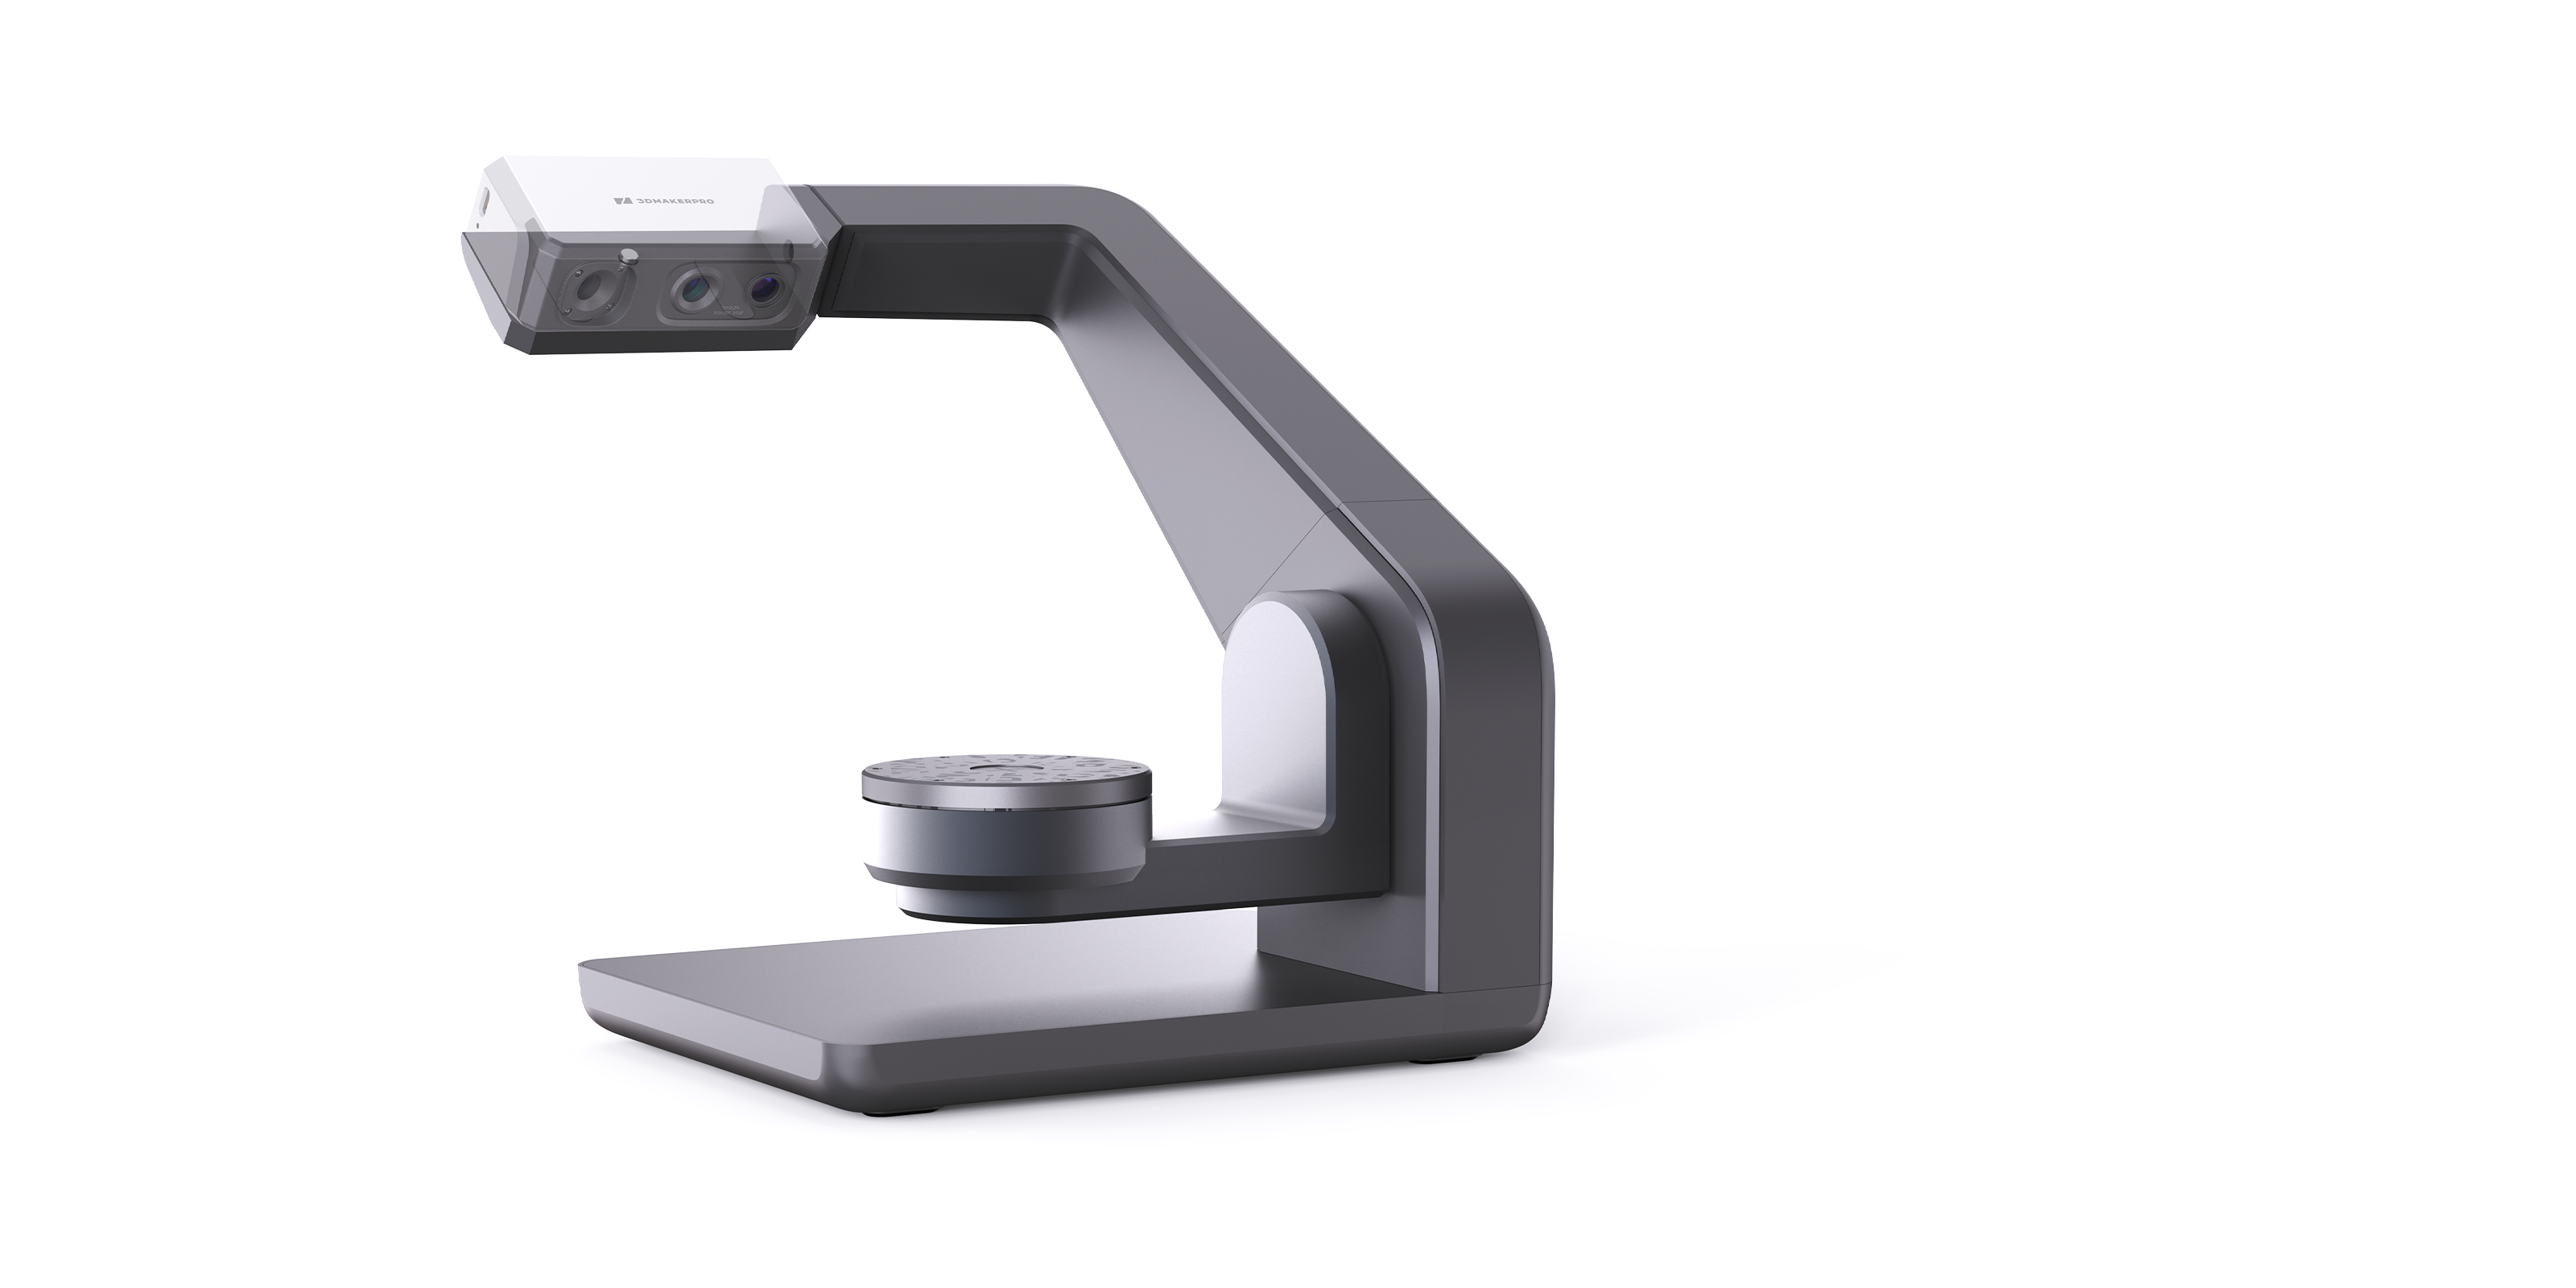 SEAL - The World's First 0.01mm Accuracy Consumer 3D Scanner